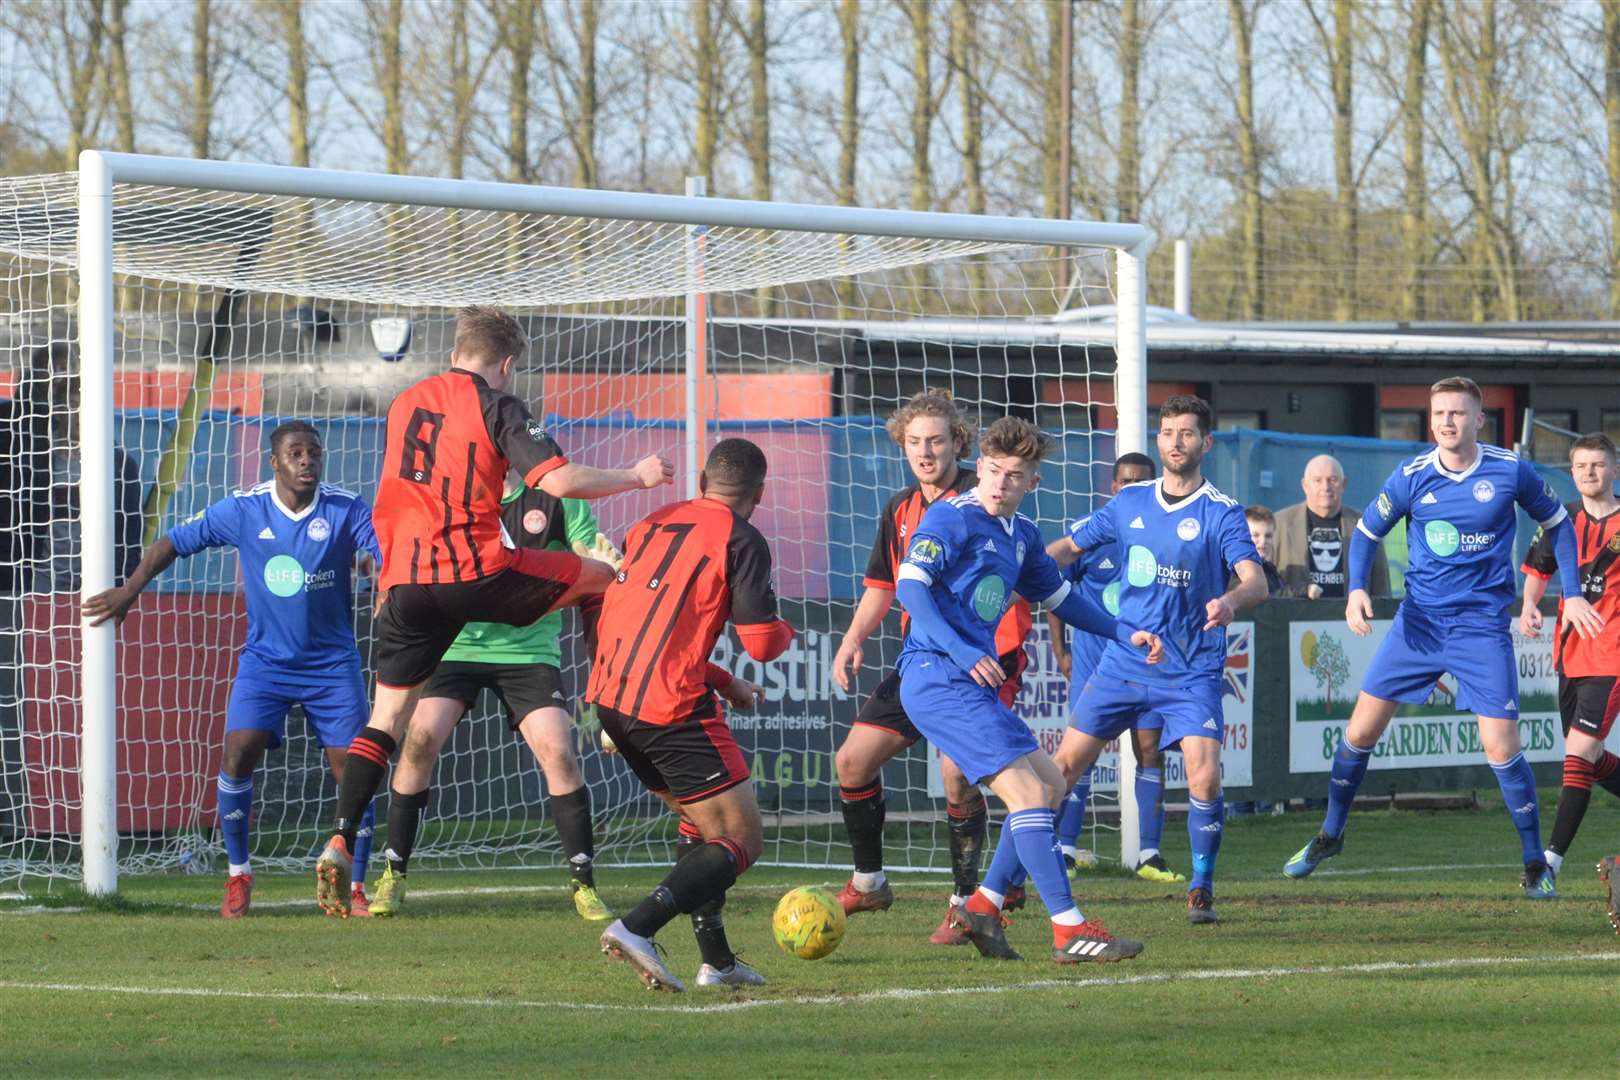 Hythe (in blue) defend their goal away to Sittingbourne Picture: Chris Davey